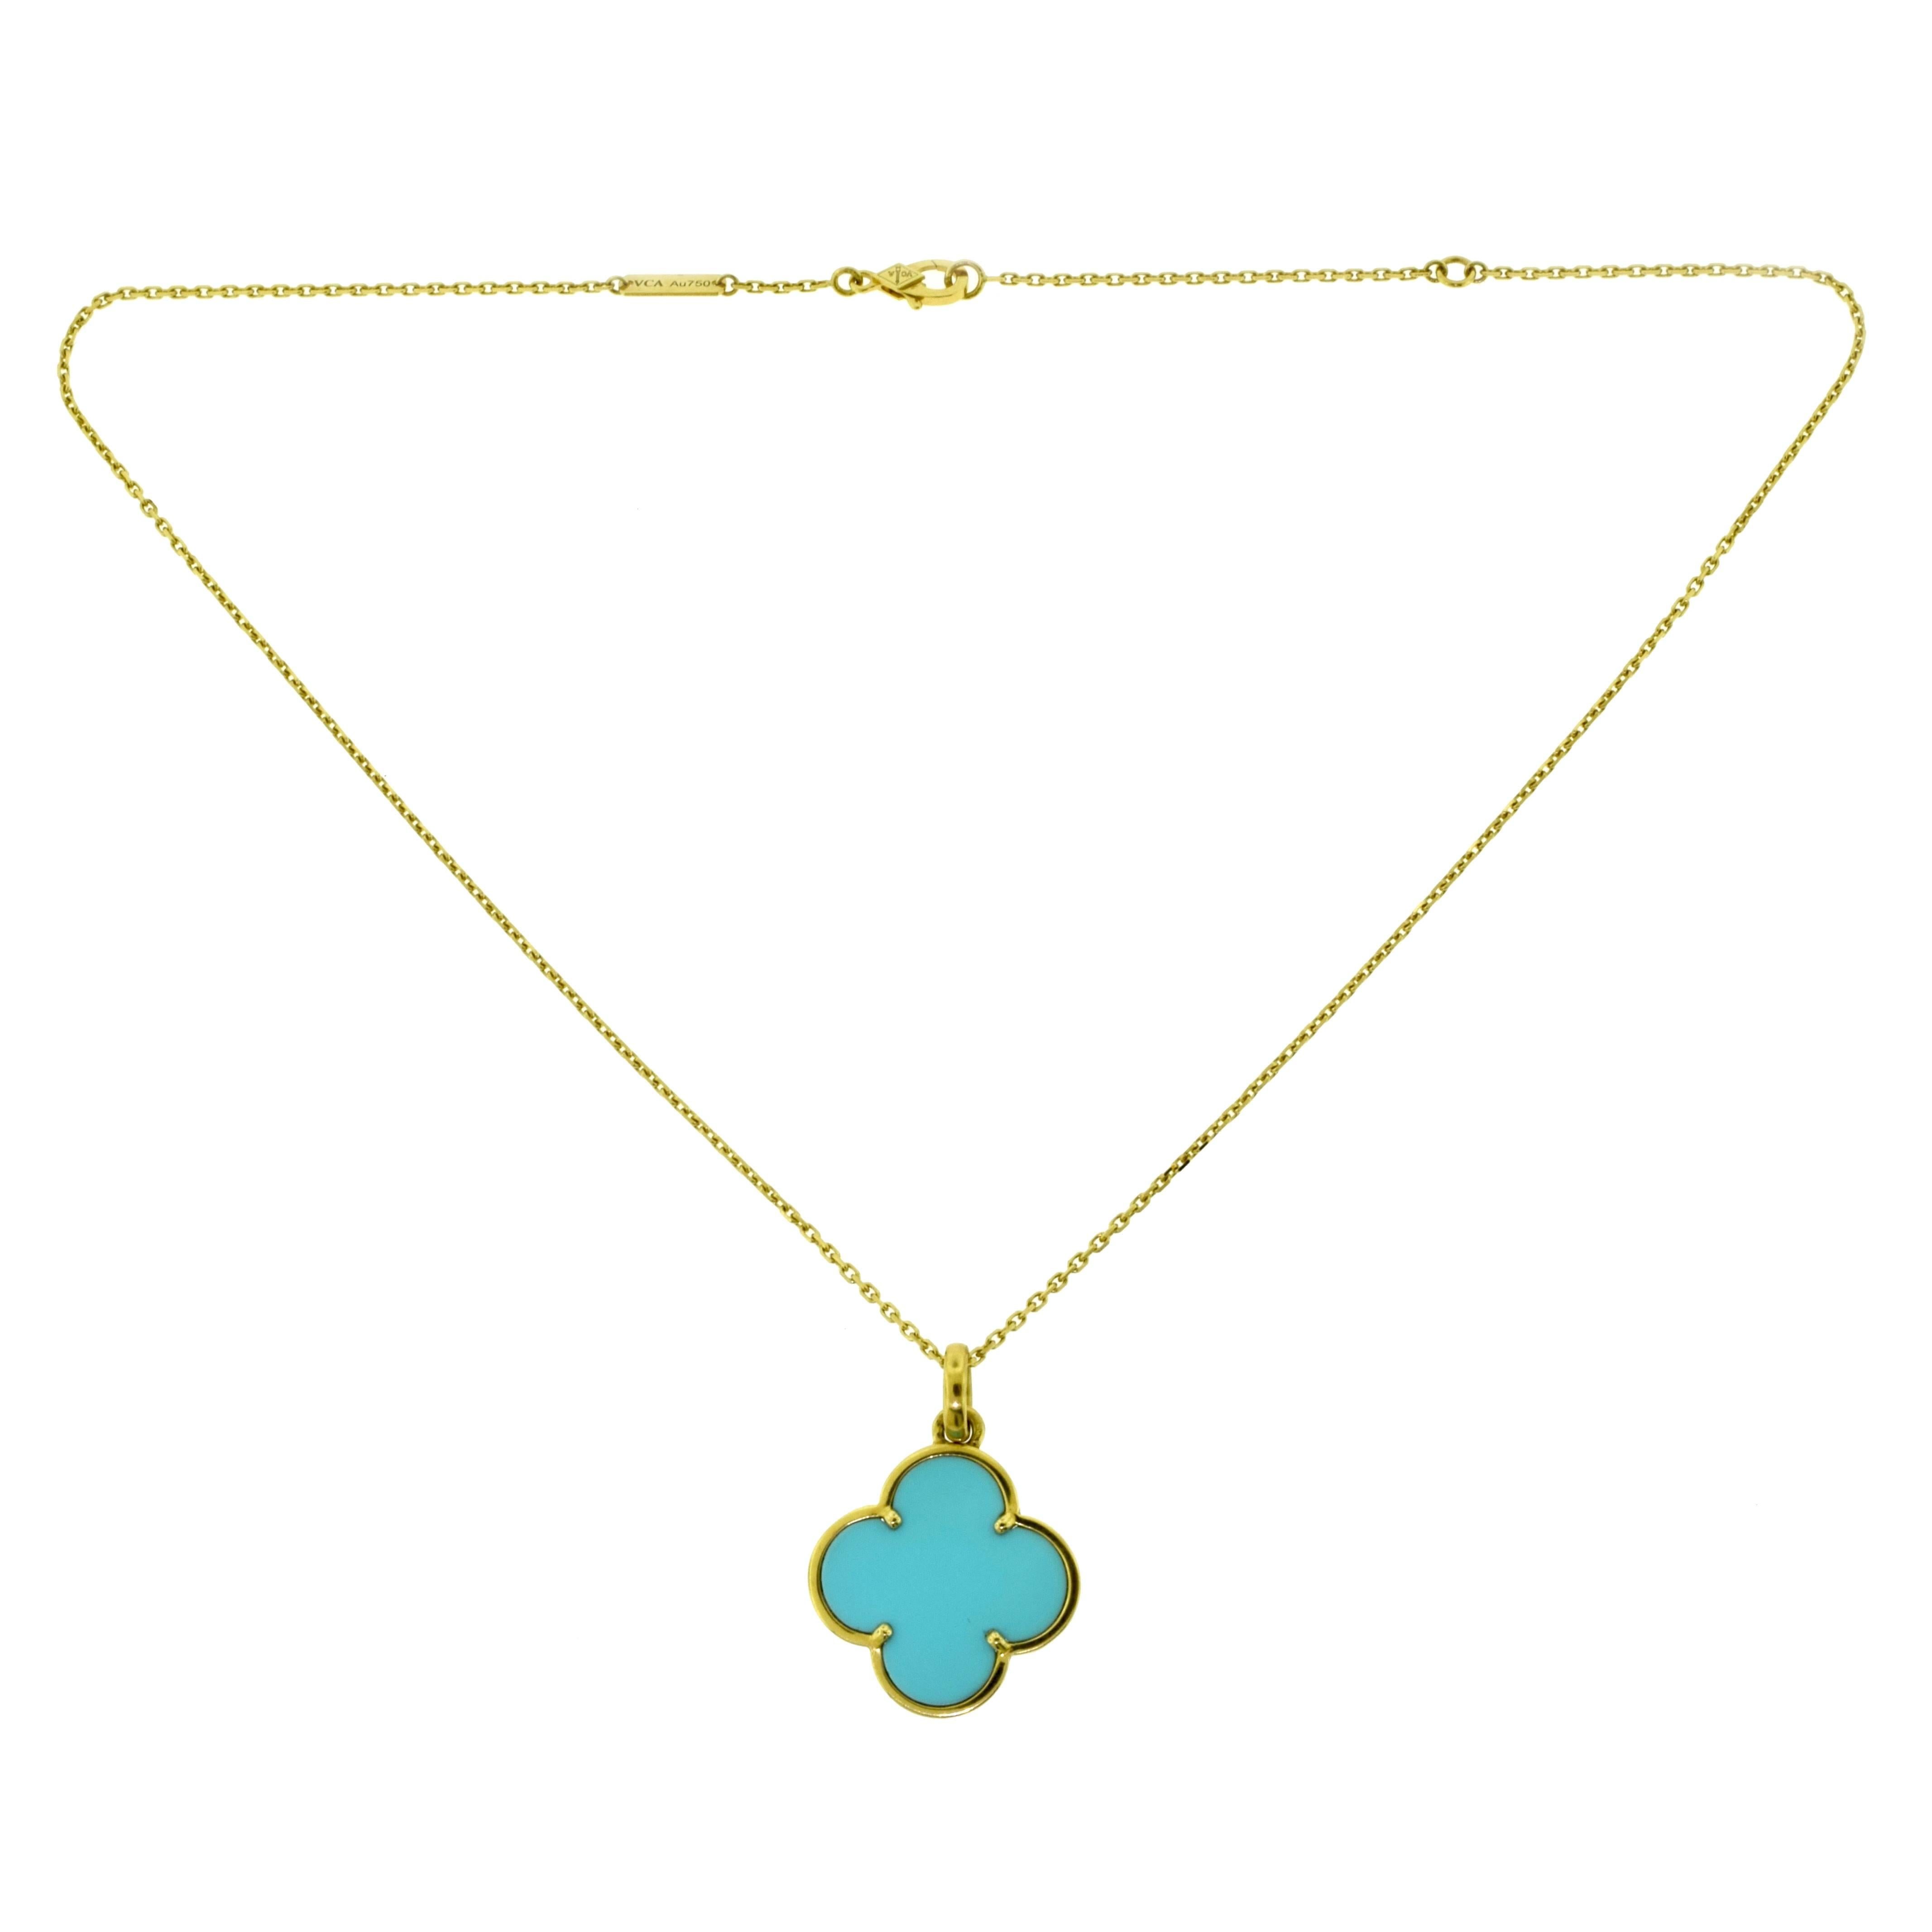 Van Cleef & Arpels Lg. Magic Alhambra Turquoise Pendant in Yellow Gold, Chain In Excellent Condition For Sale In Miami, FL